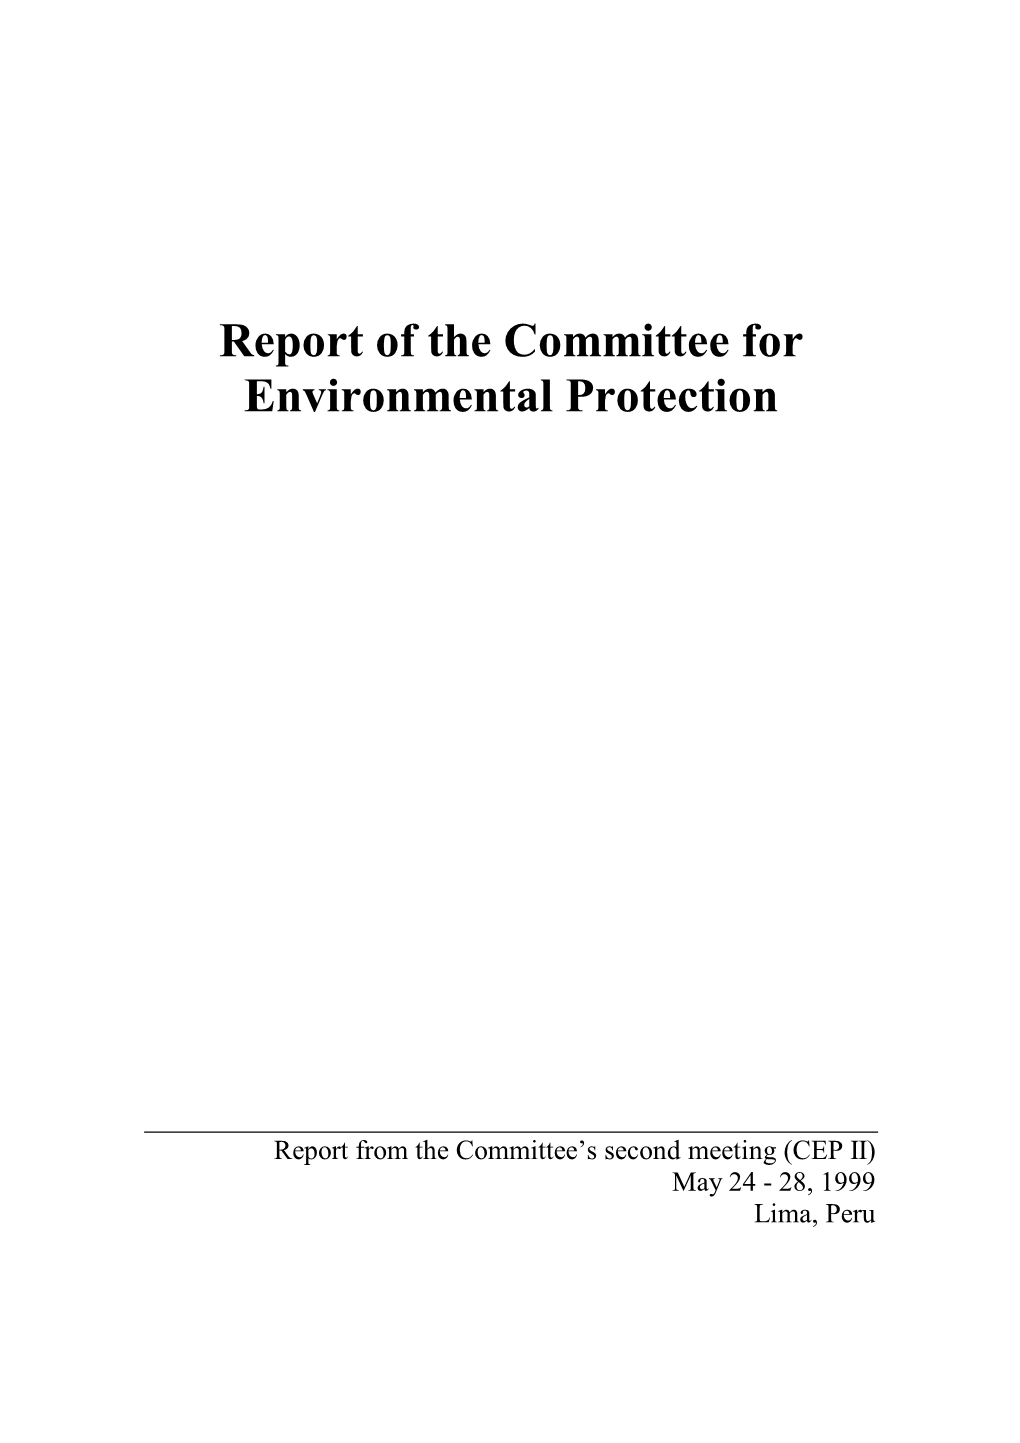 Report of the Committee for Environmental Protection